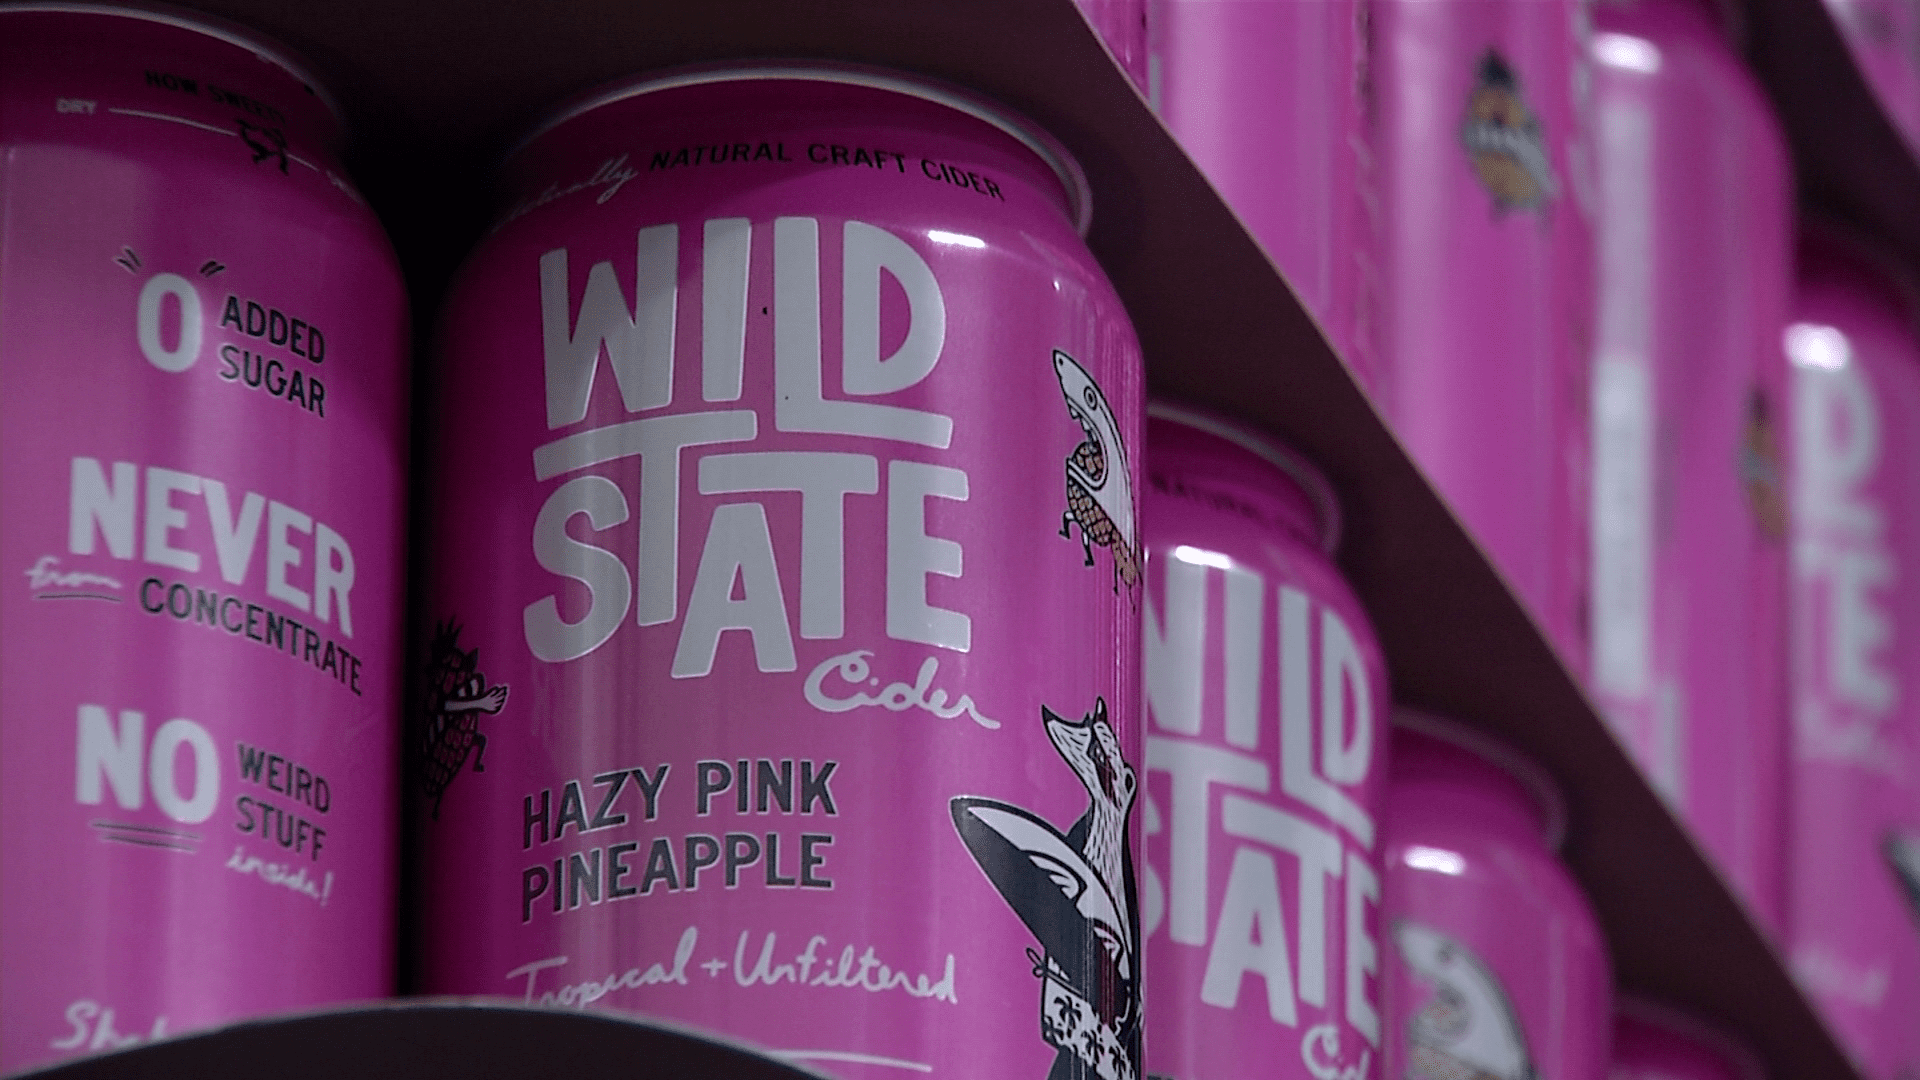 Photo of a Wild State Cider can.